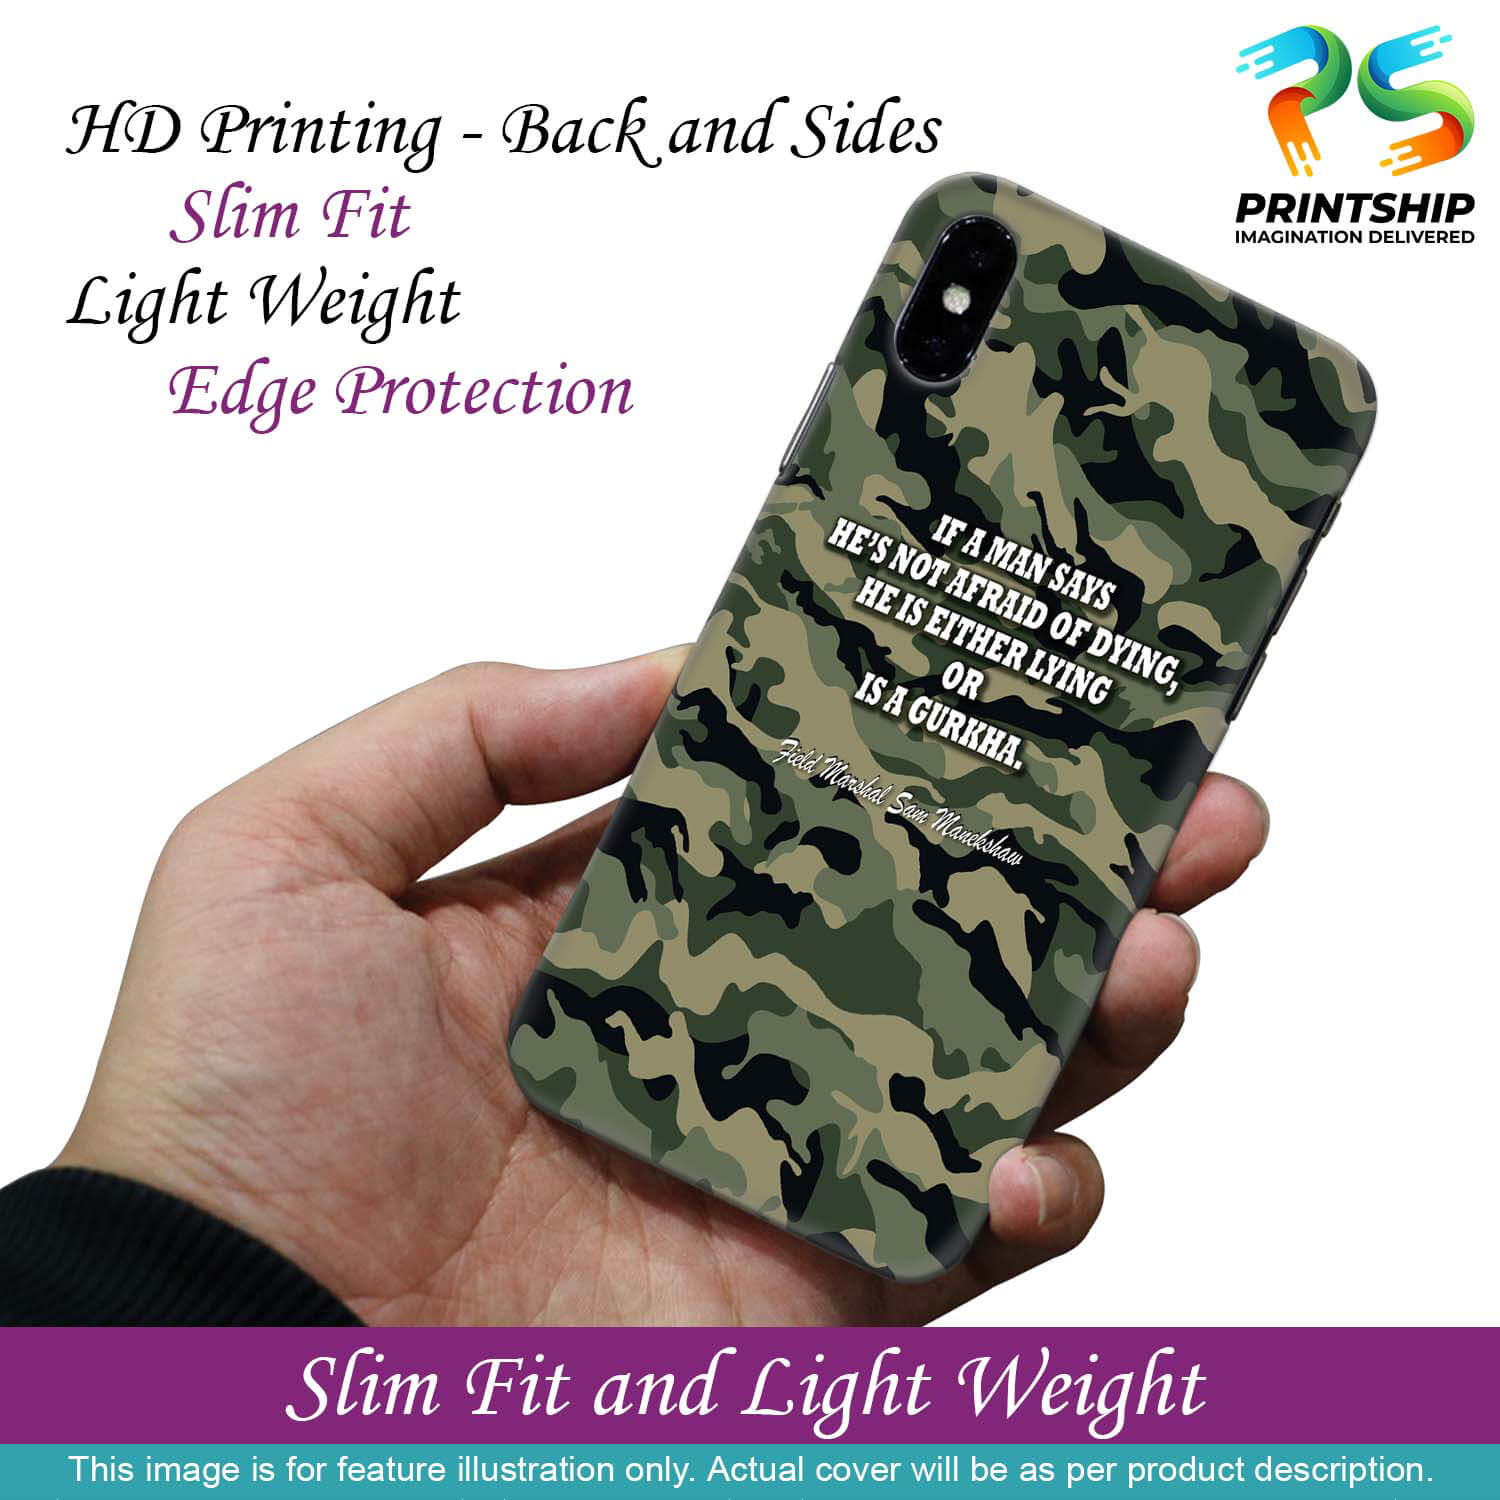 W0450-Indian Army Quote Back Cover for Samsung Galaxy A2 Core